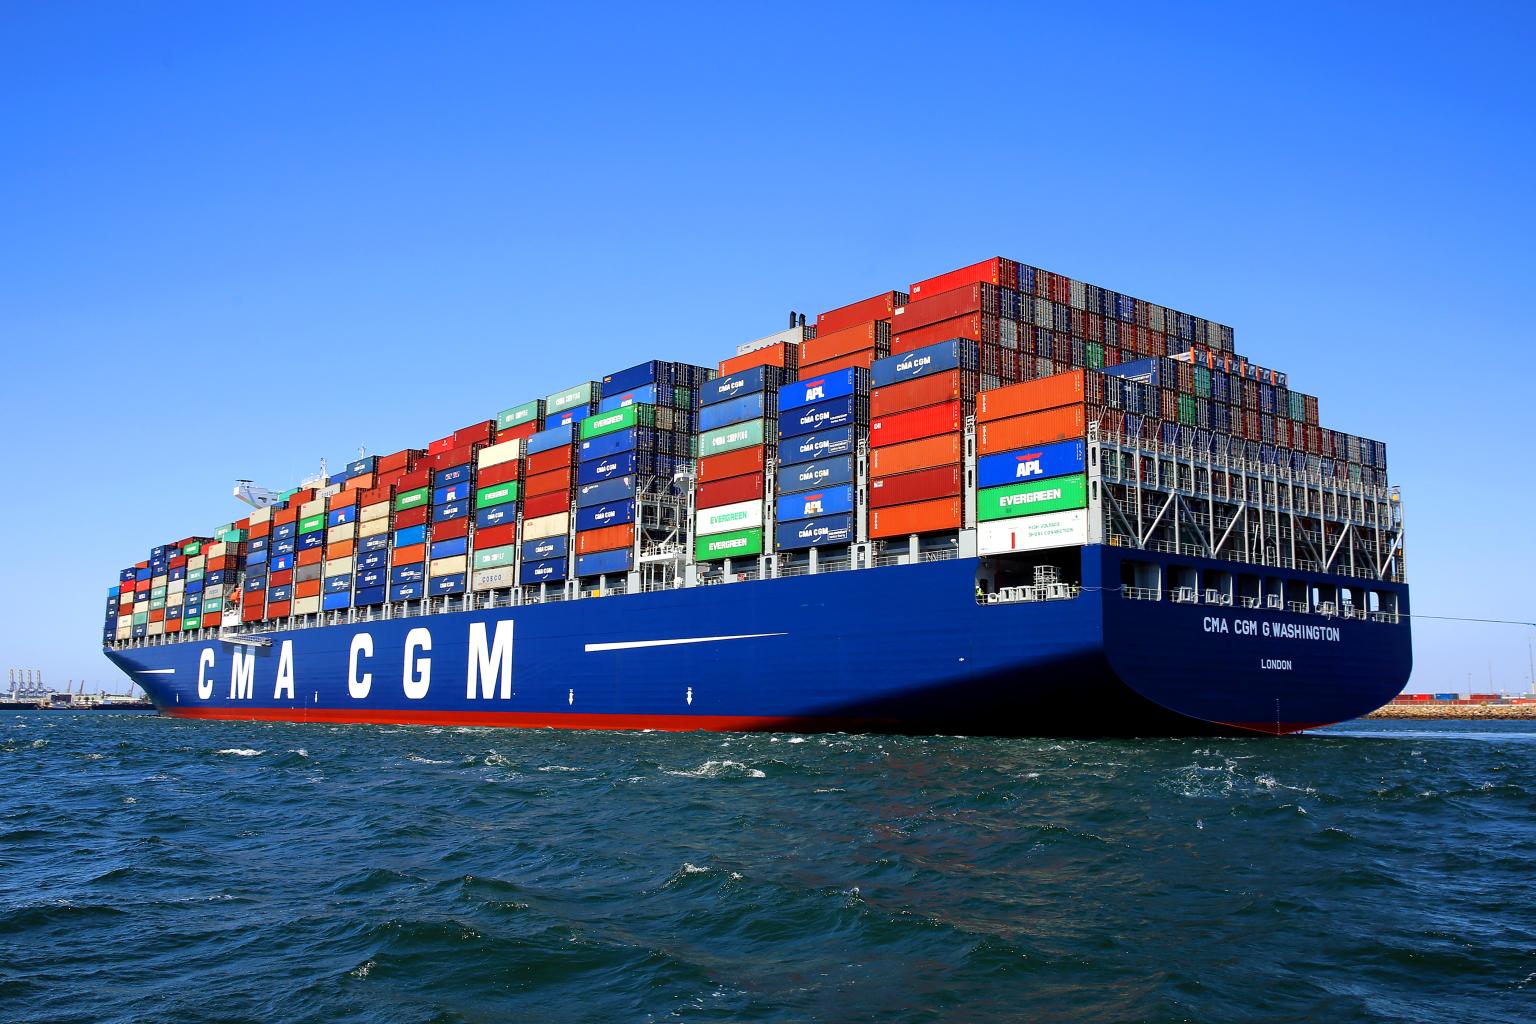 CMA CGM to buy 30% stake in French airline company